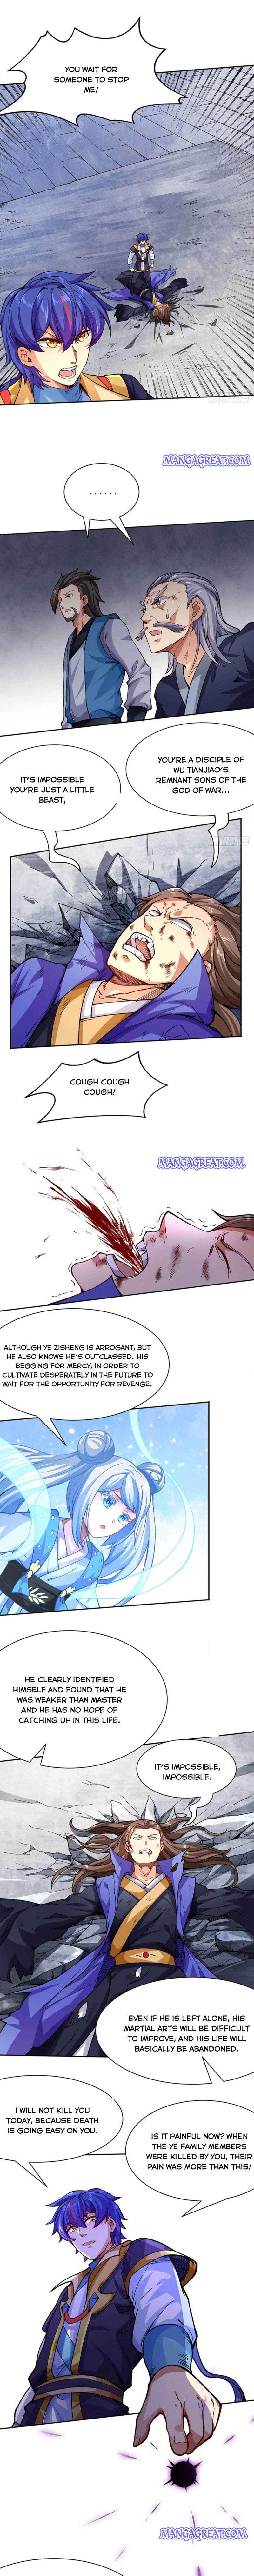 Martial Arts Reigns Chapter 266 page 1